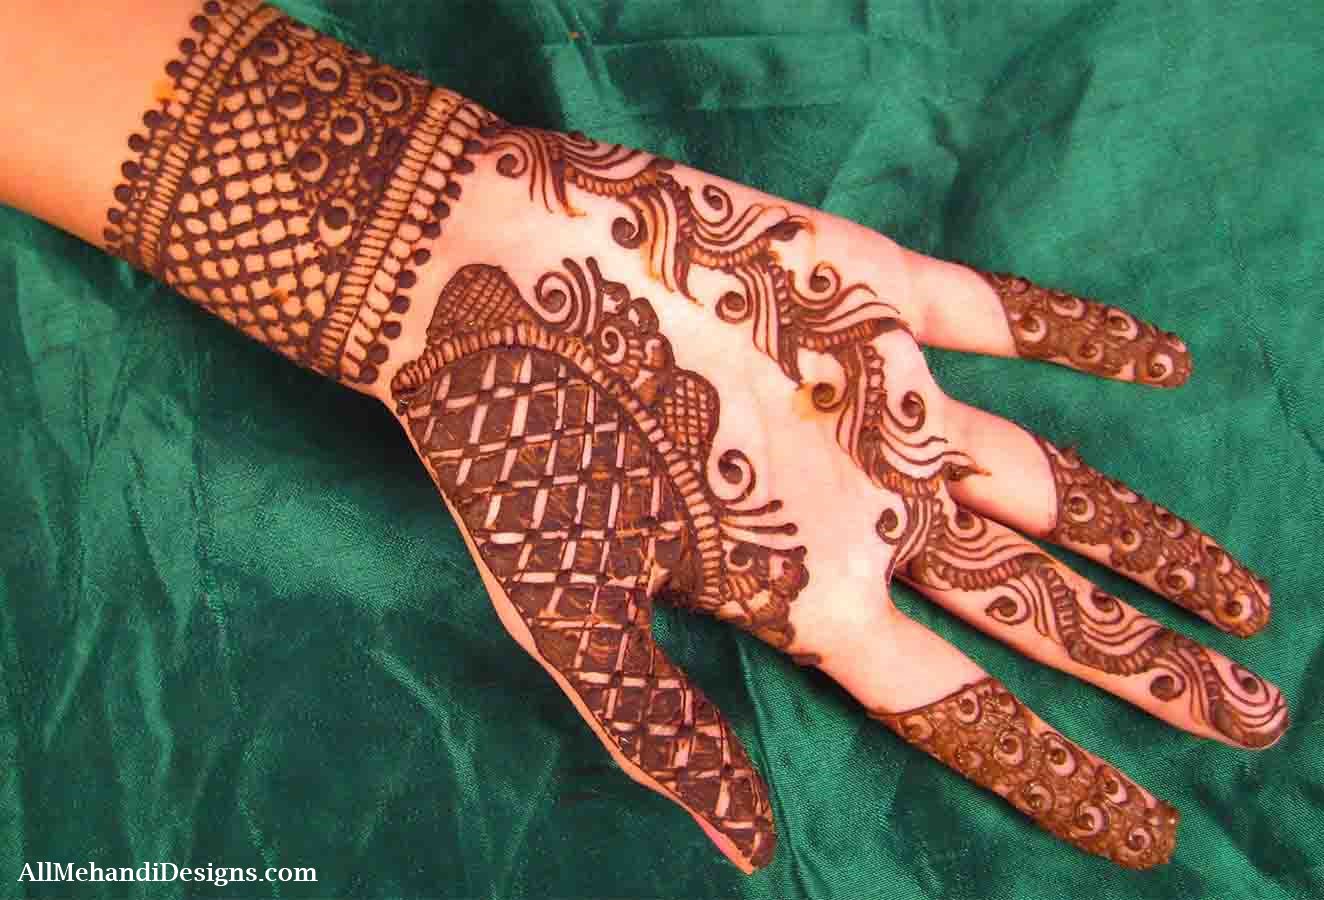 Pakistani Mehndi Designs Pakistani Mehndi Designs for Hands Pakistani Mehndi Designs for Wedding Photos Pakistani Mehndi Designs for Full Hands Pakistani Mehndi Designs for Left Hand Pakistani Mehndi Designs for Right Hand Pakistani Mehndi Designs images 2017 Pakistani Mehndi Henna Designs Pakistandi Bridal Mehndi Designs Ideas Pakistani Mehndi Designs for Eid Arabic Pakistani Mehndi Designs Simple and Easy Pakistani Mehndi Designs Easy Pakistani Mehndi Designs Images Step by Step Simple Pakistani Henna Designs Beautiful Pakistani Mehndi Pattern Latest Images and Ideas of Mehndi Designs for Pakistani Beautiful Pakistani Mehndi Designs for Husband Cute Pakistani Henna Tattoos Designs for Hands Step by Step Henna Tattoo Art Pictures Pakistani Henna Mehndi Designs Ideas Photos Unique Pakistani Henna Tattoos Designs for Legs Creative Pakistani Henna Tattoos Ideas Photos Best Pakistani Henna Tattoos Designs for Fingers 1000+ Pakistani Mehndi Designs - Henna Patterns & Pictures Get Latest Simple and Easy Pakistani Mehndi Designs Ideas Here. These Types of Arabic Pakistani Henna Patterns for Hands and Weddings are Best Choice.